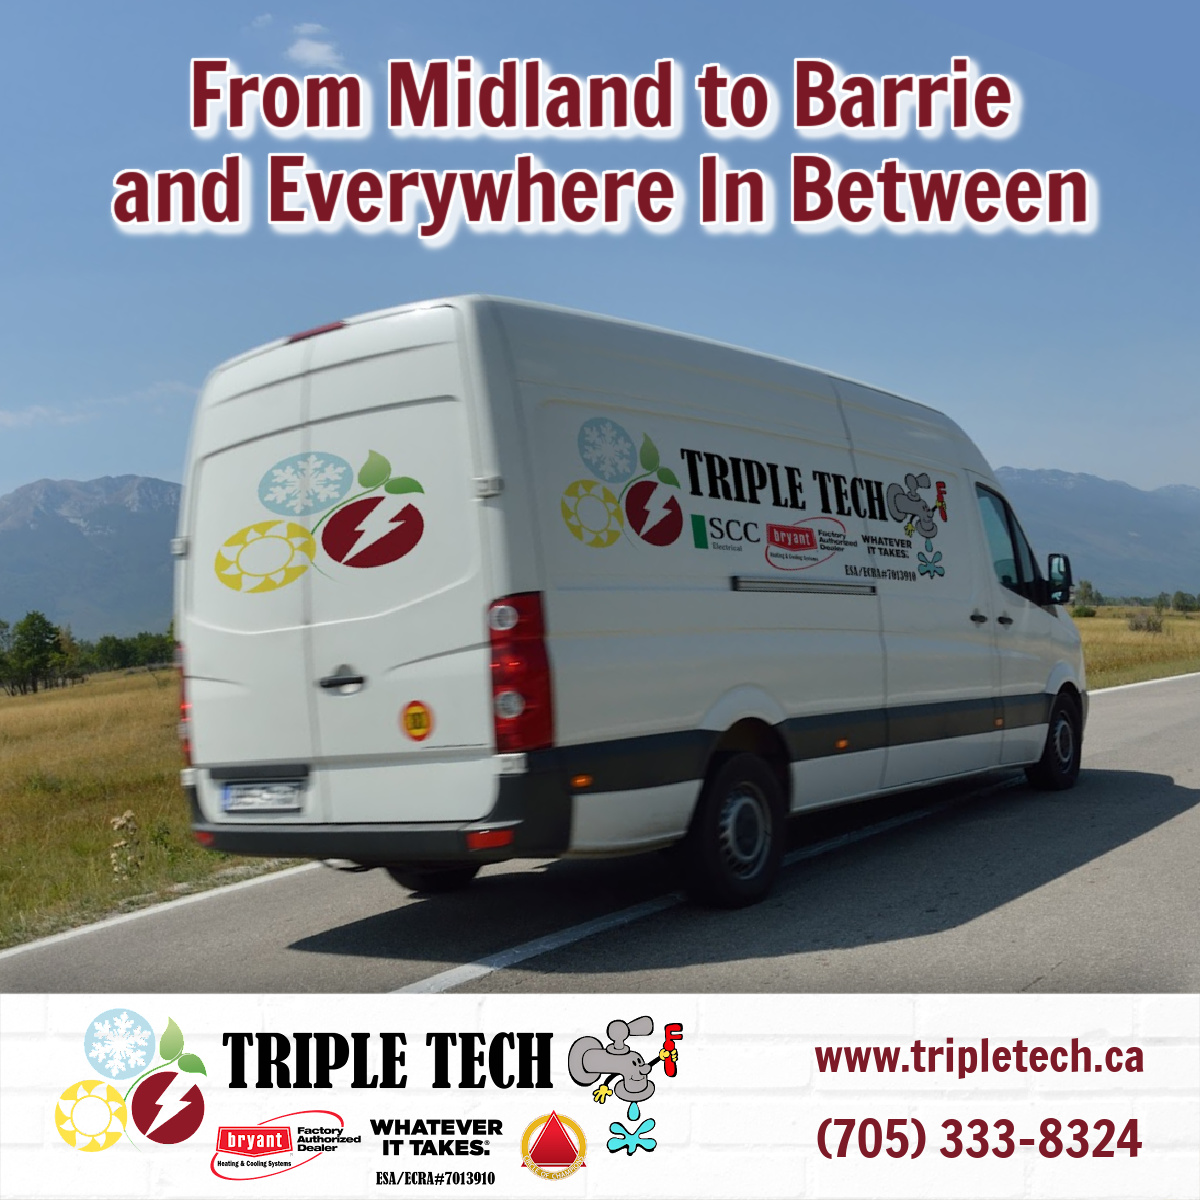 From Midland to Barrie and everywhere in between, we’ve got your HVAC services covered.

705-333-8324.

#BryantAd #Bryant #BryantCircleOfChampions #CircleOfChampions